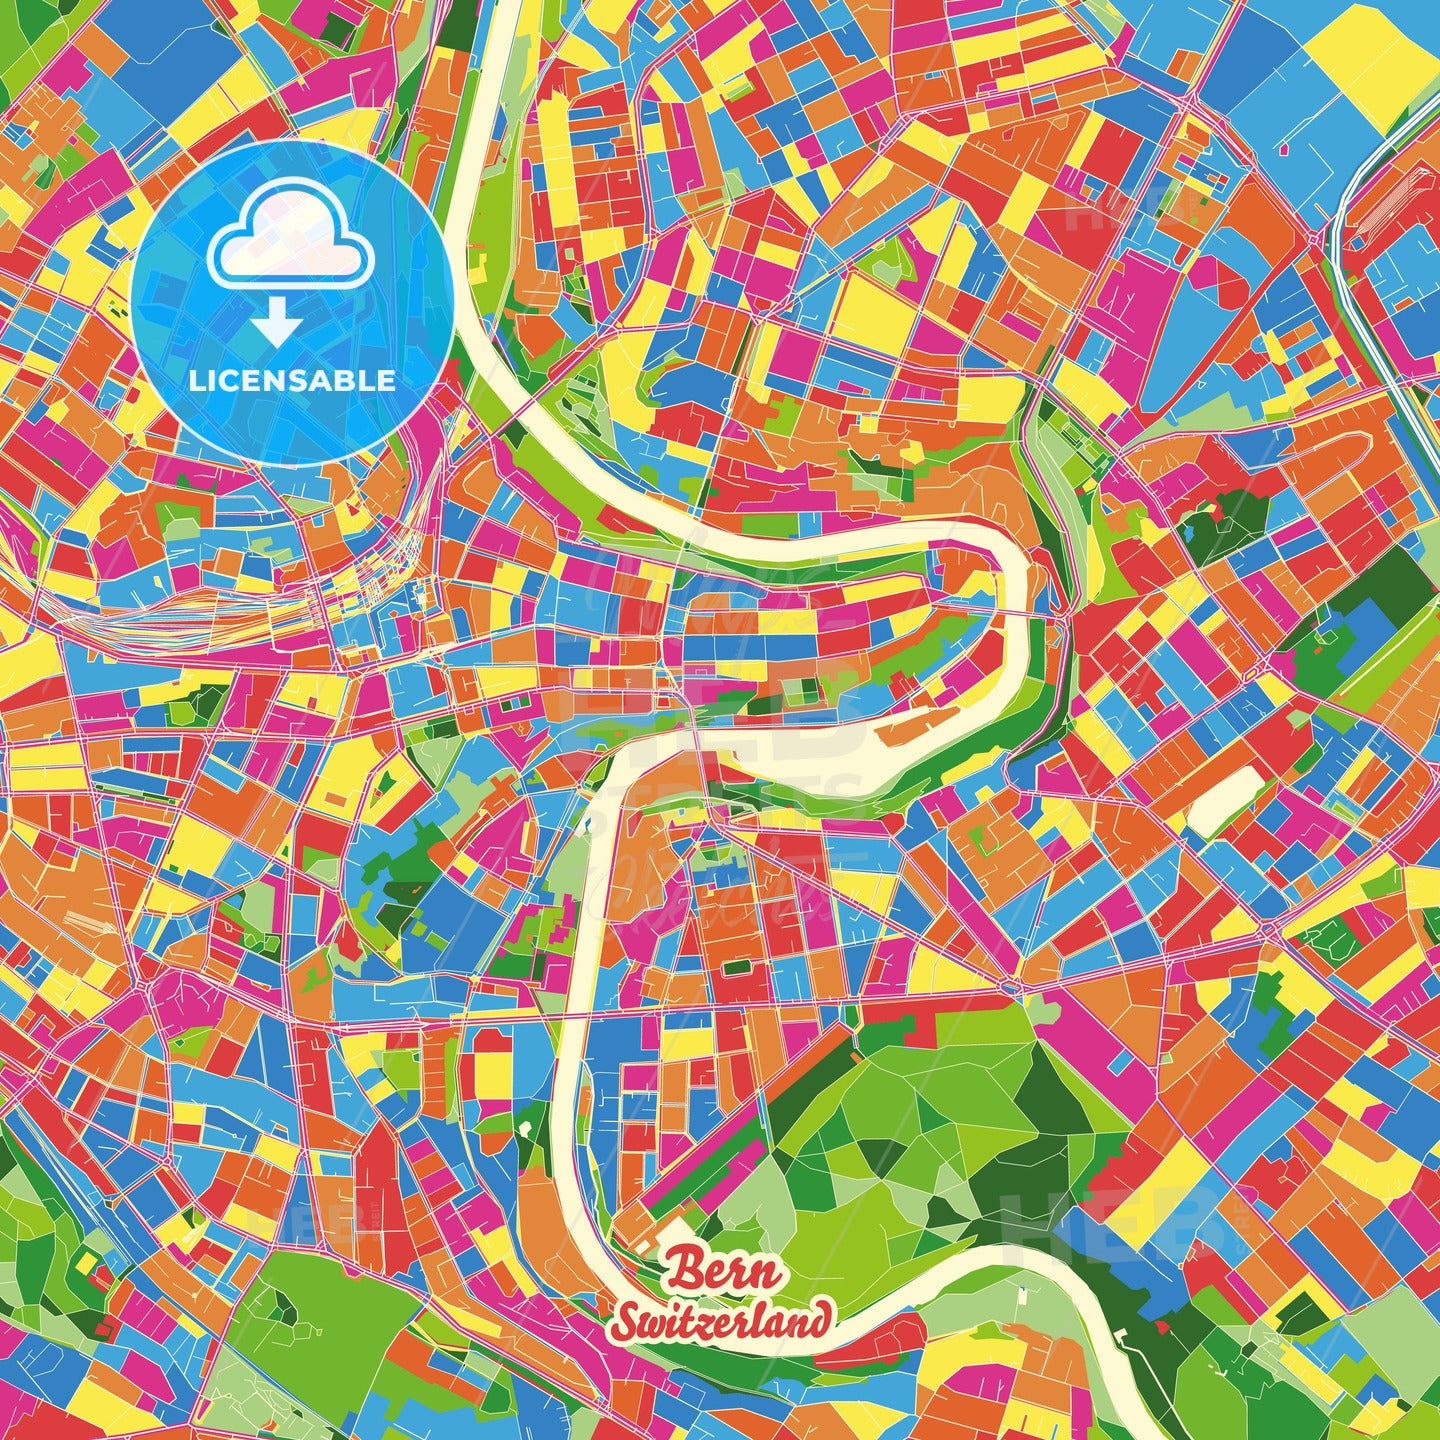 Bern, Switzerland Crazy Colorful Street Map Poster Template - HEBSTREITS Sketches